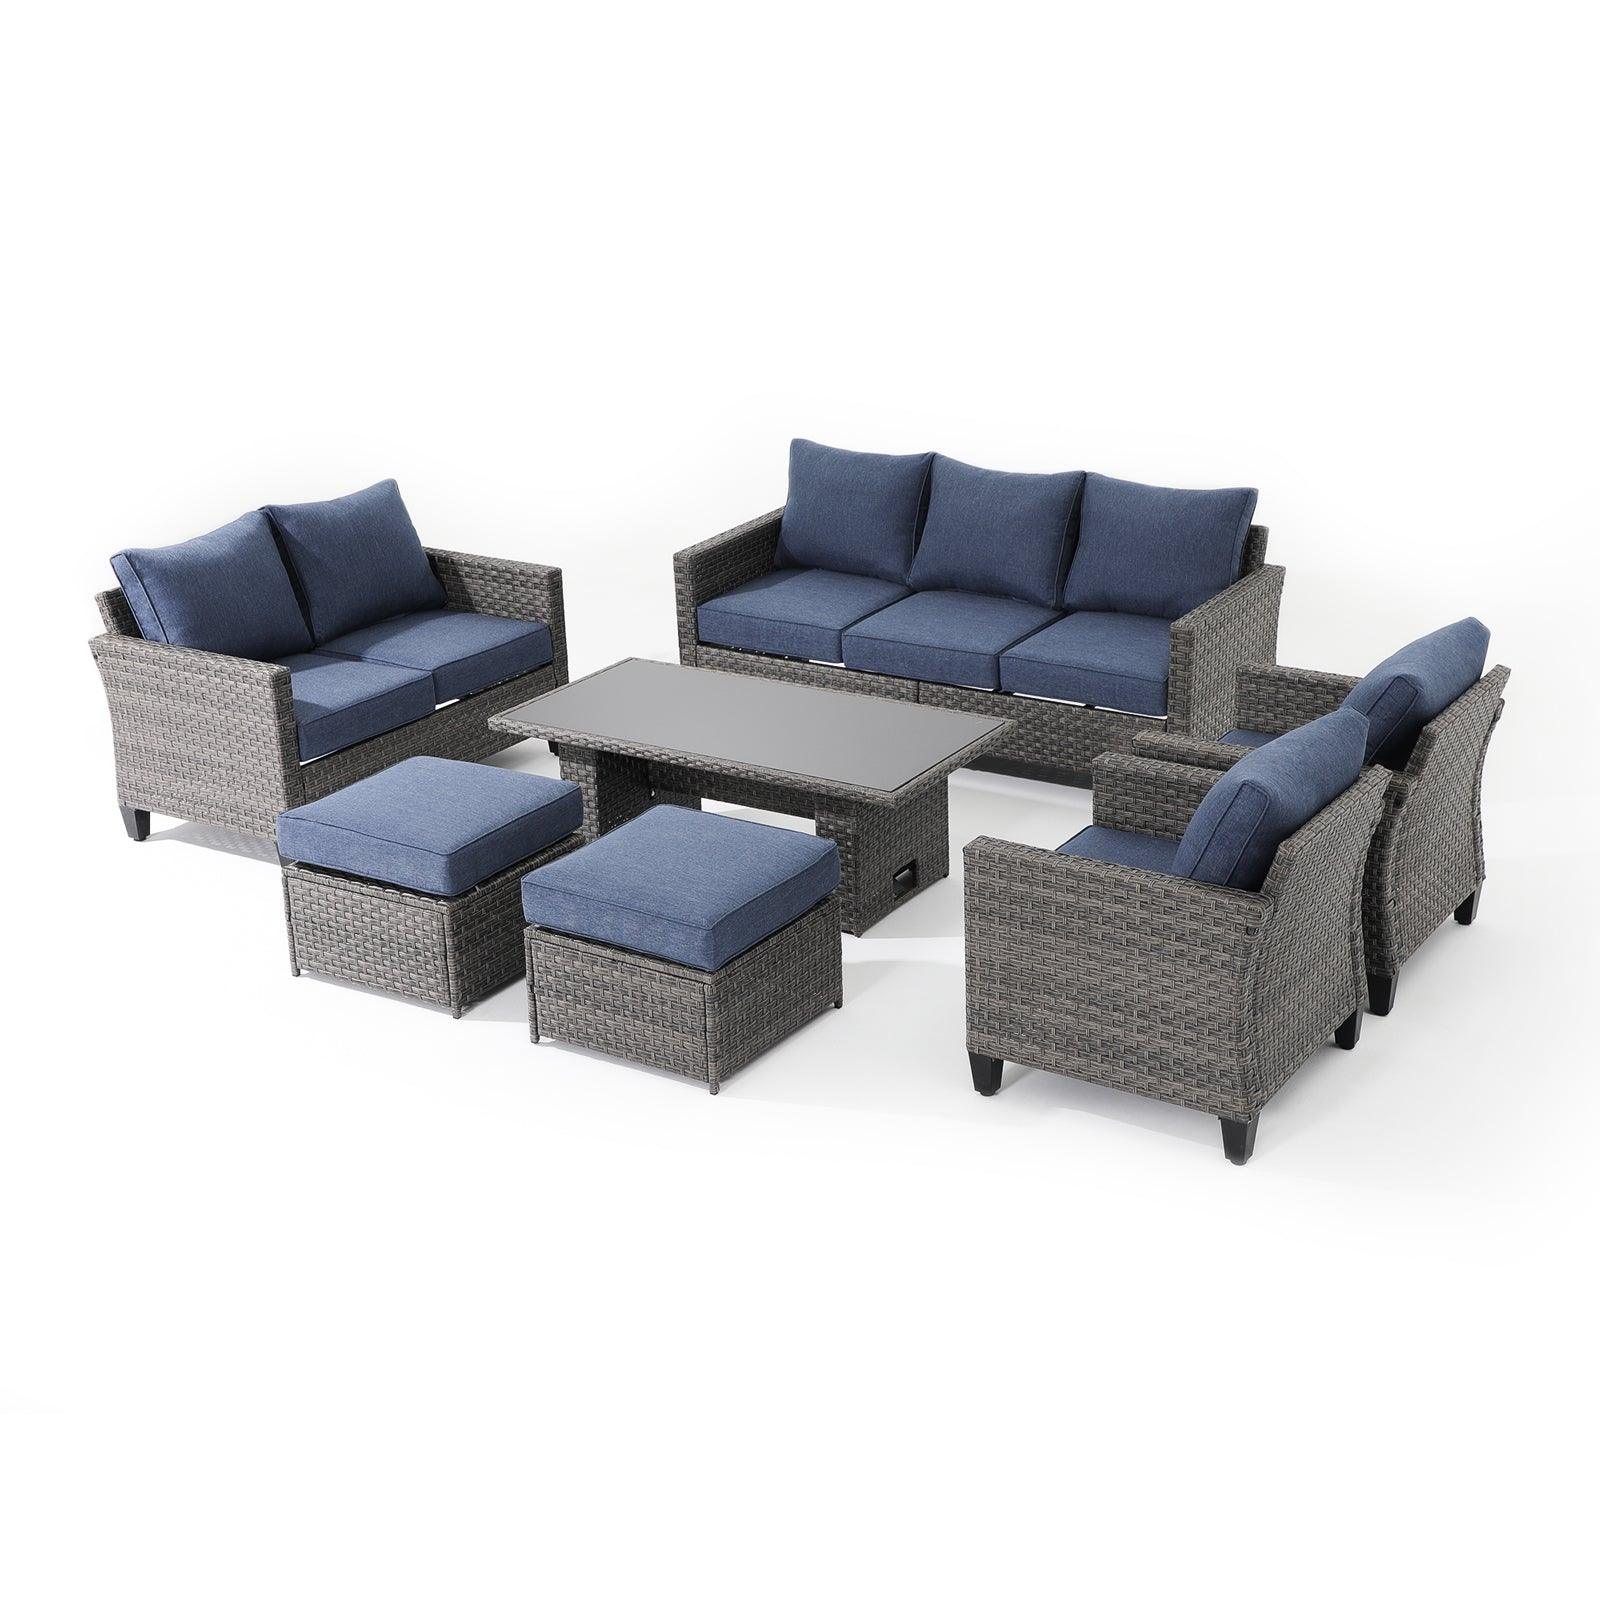 Ayia 7-Piece outdoor Sofa Set with Rattan design, Navy Blue cushions, a 3-seater sofa, 2 arm chairs , 2 ottomans, 1 loveseat multifunctional outdoor table, left angle- Jardina Furniture #color_Navy blue#piece_7-pc. with ottomans & Table